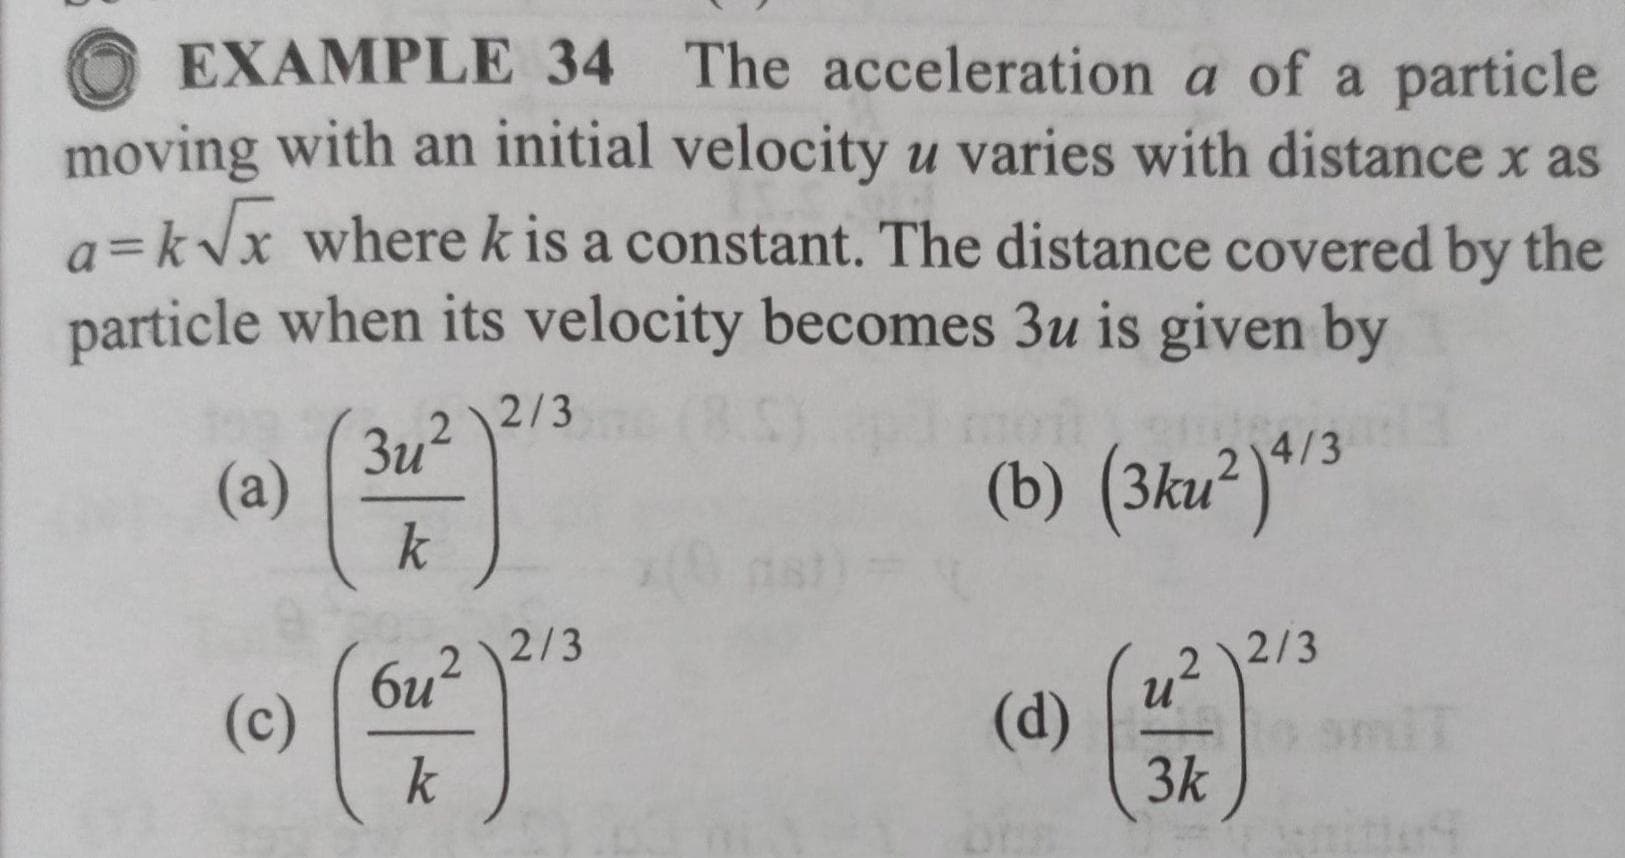 EXAMPLE 34 The acceleration a of a particle
moving with an initial velocity u varies with distance x as
a=kVx wherek is a constant. The distance covered by the
particle when its velocity becomes 3u is given by
2 \2/3
3u?
(a)
k
(b) (3ku²)^3
4/3
2/3
2
2/3
(c)
k
(d)
0 amiT
3k
